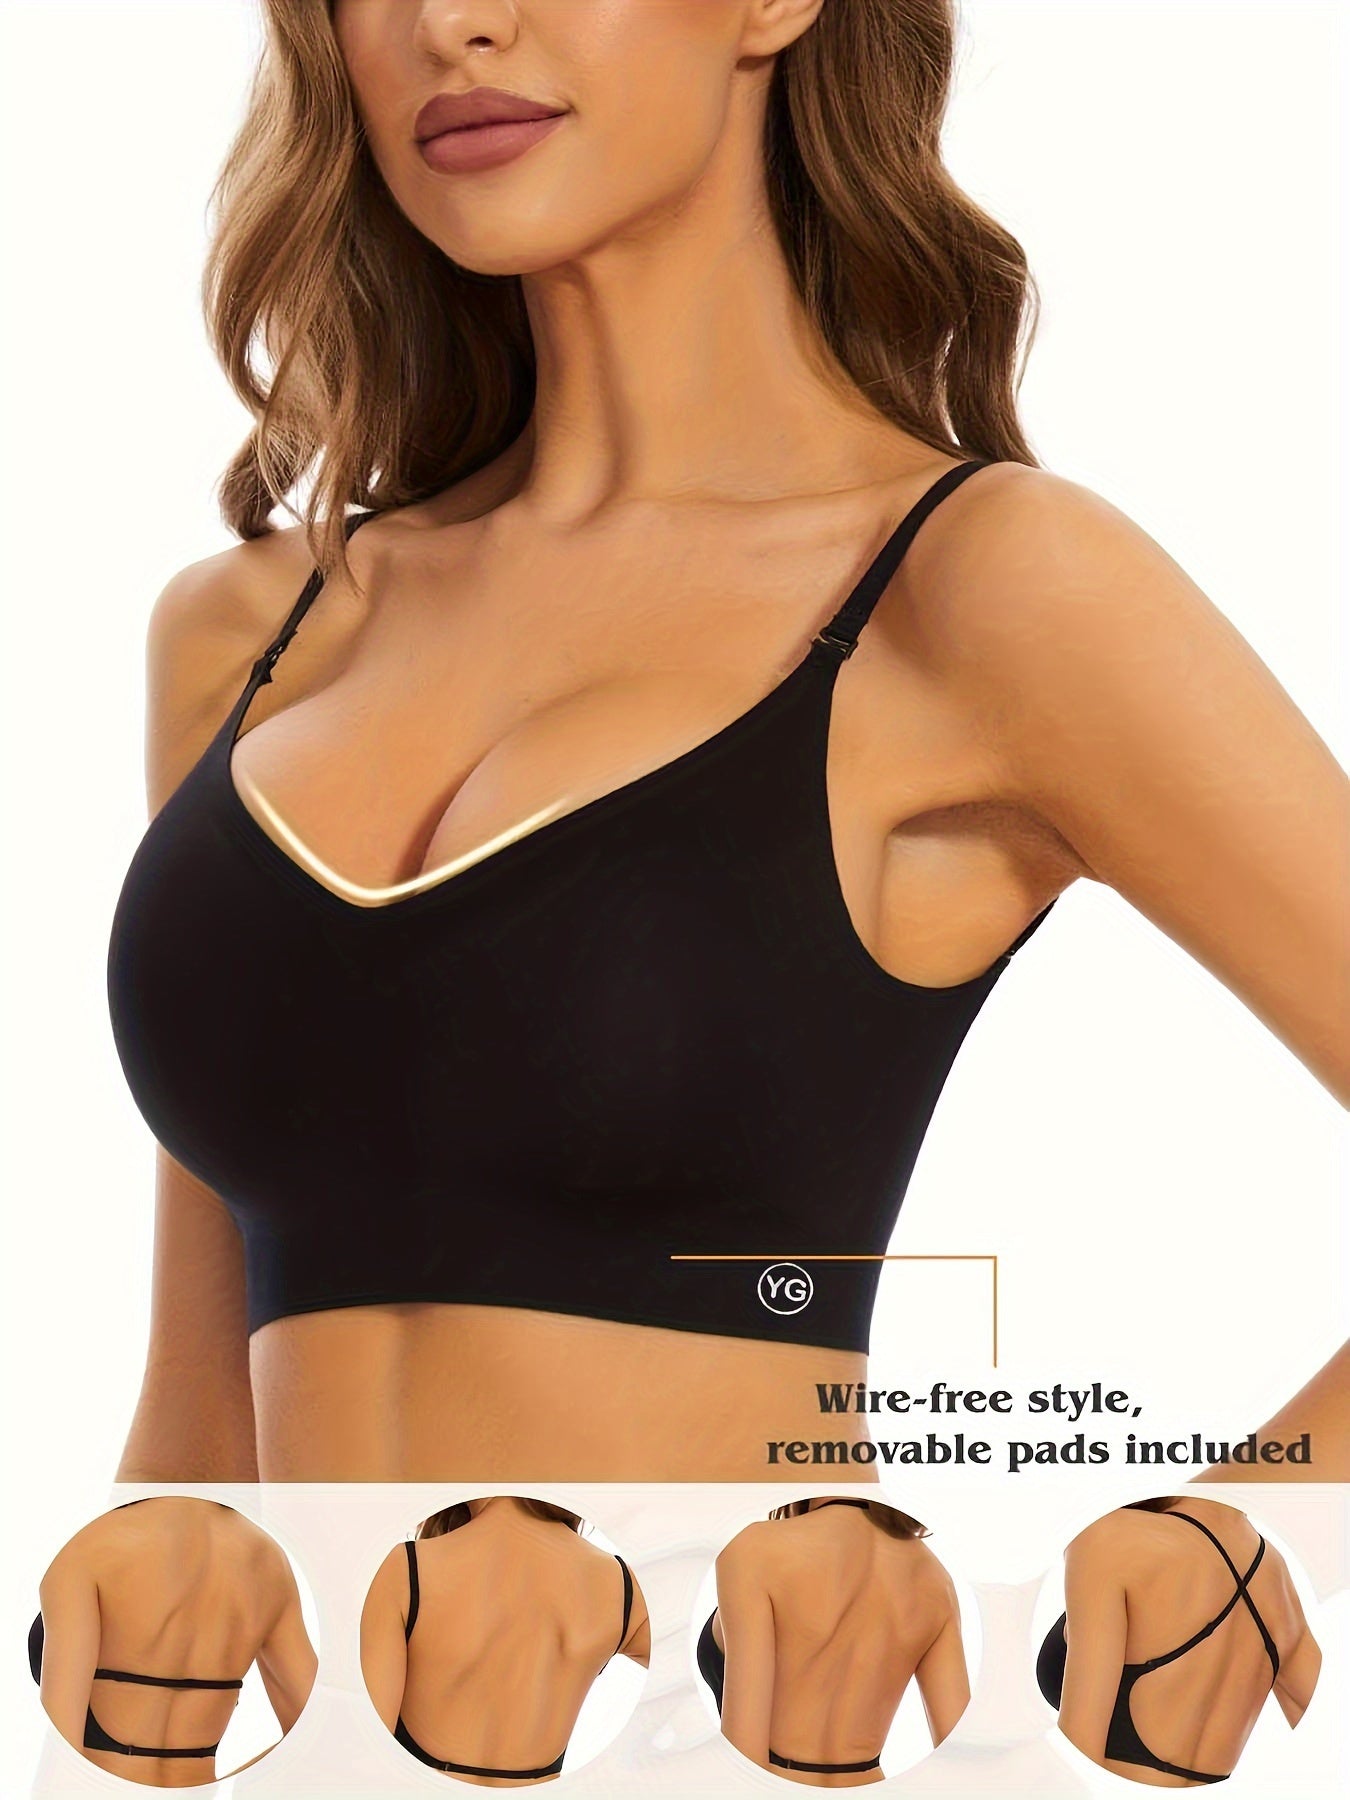 Womens Seamless V-Neck Wireless Sports Bra - Ultra Low-Back Design, Adjustable Fit, Removable Chest Pad, Breathable Medium Stretch Nylon Fabric, Backless, Solid Color, No Printing - Perfect for Active Women - Irene's Secret